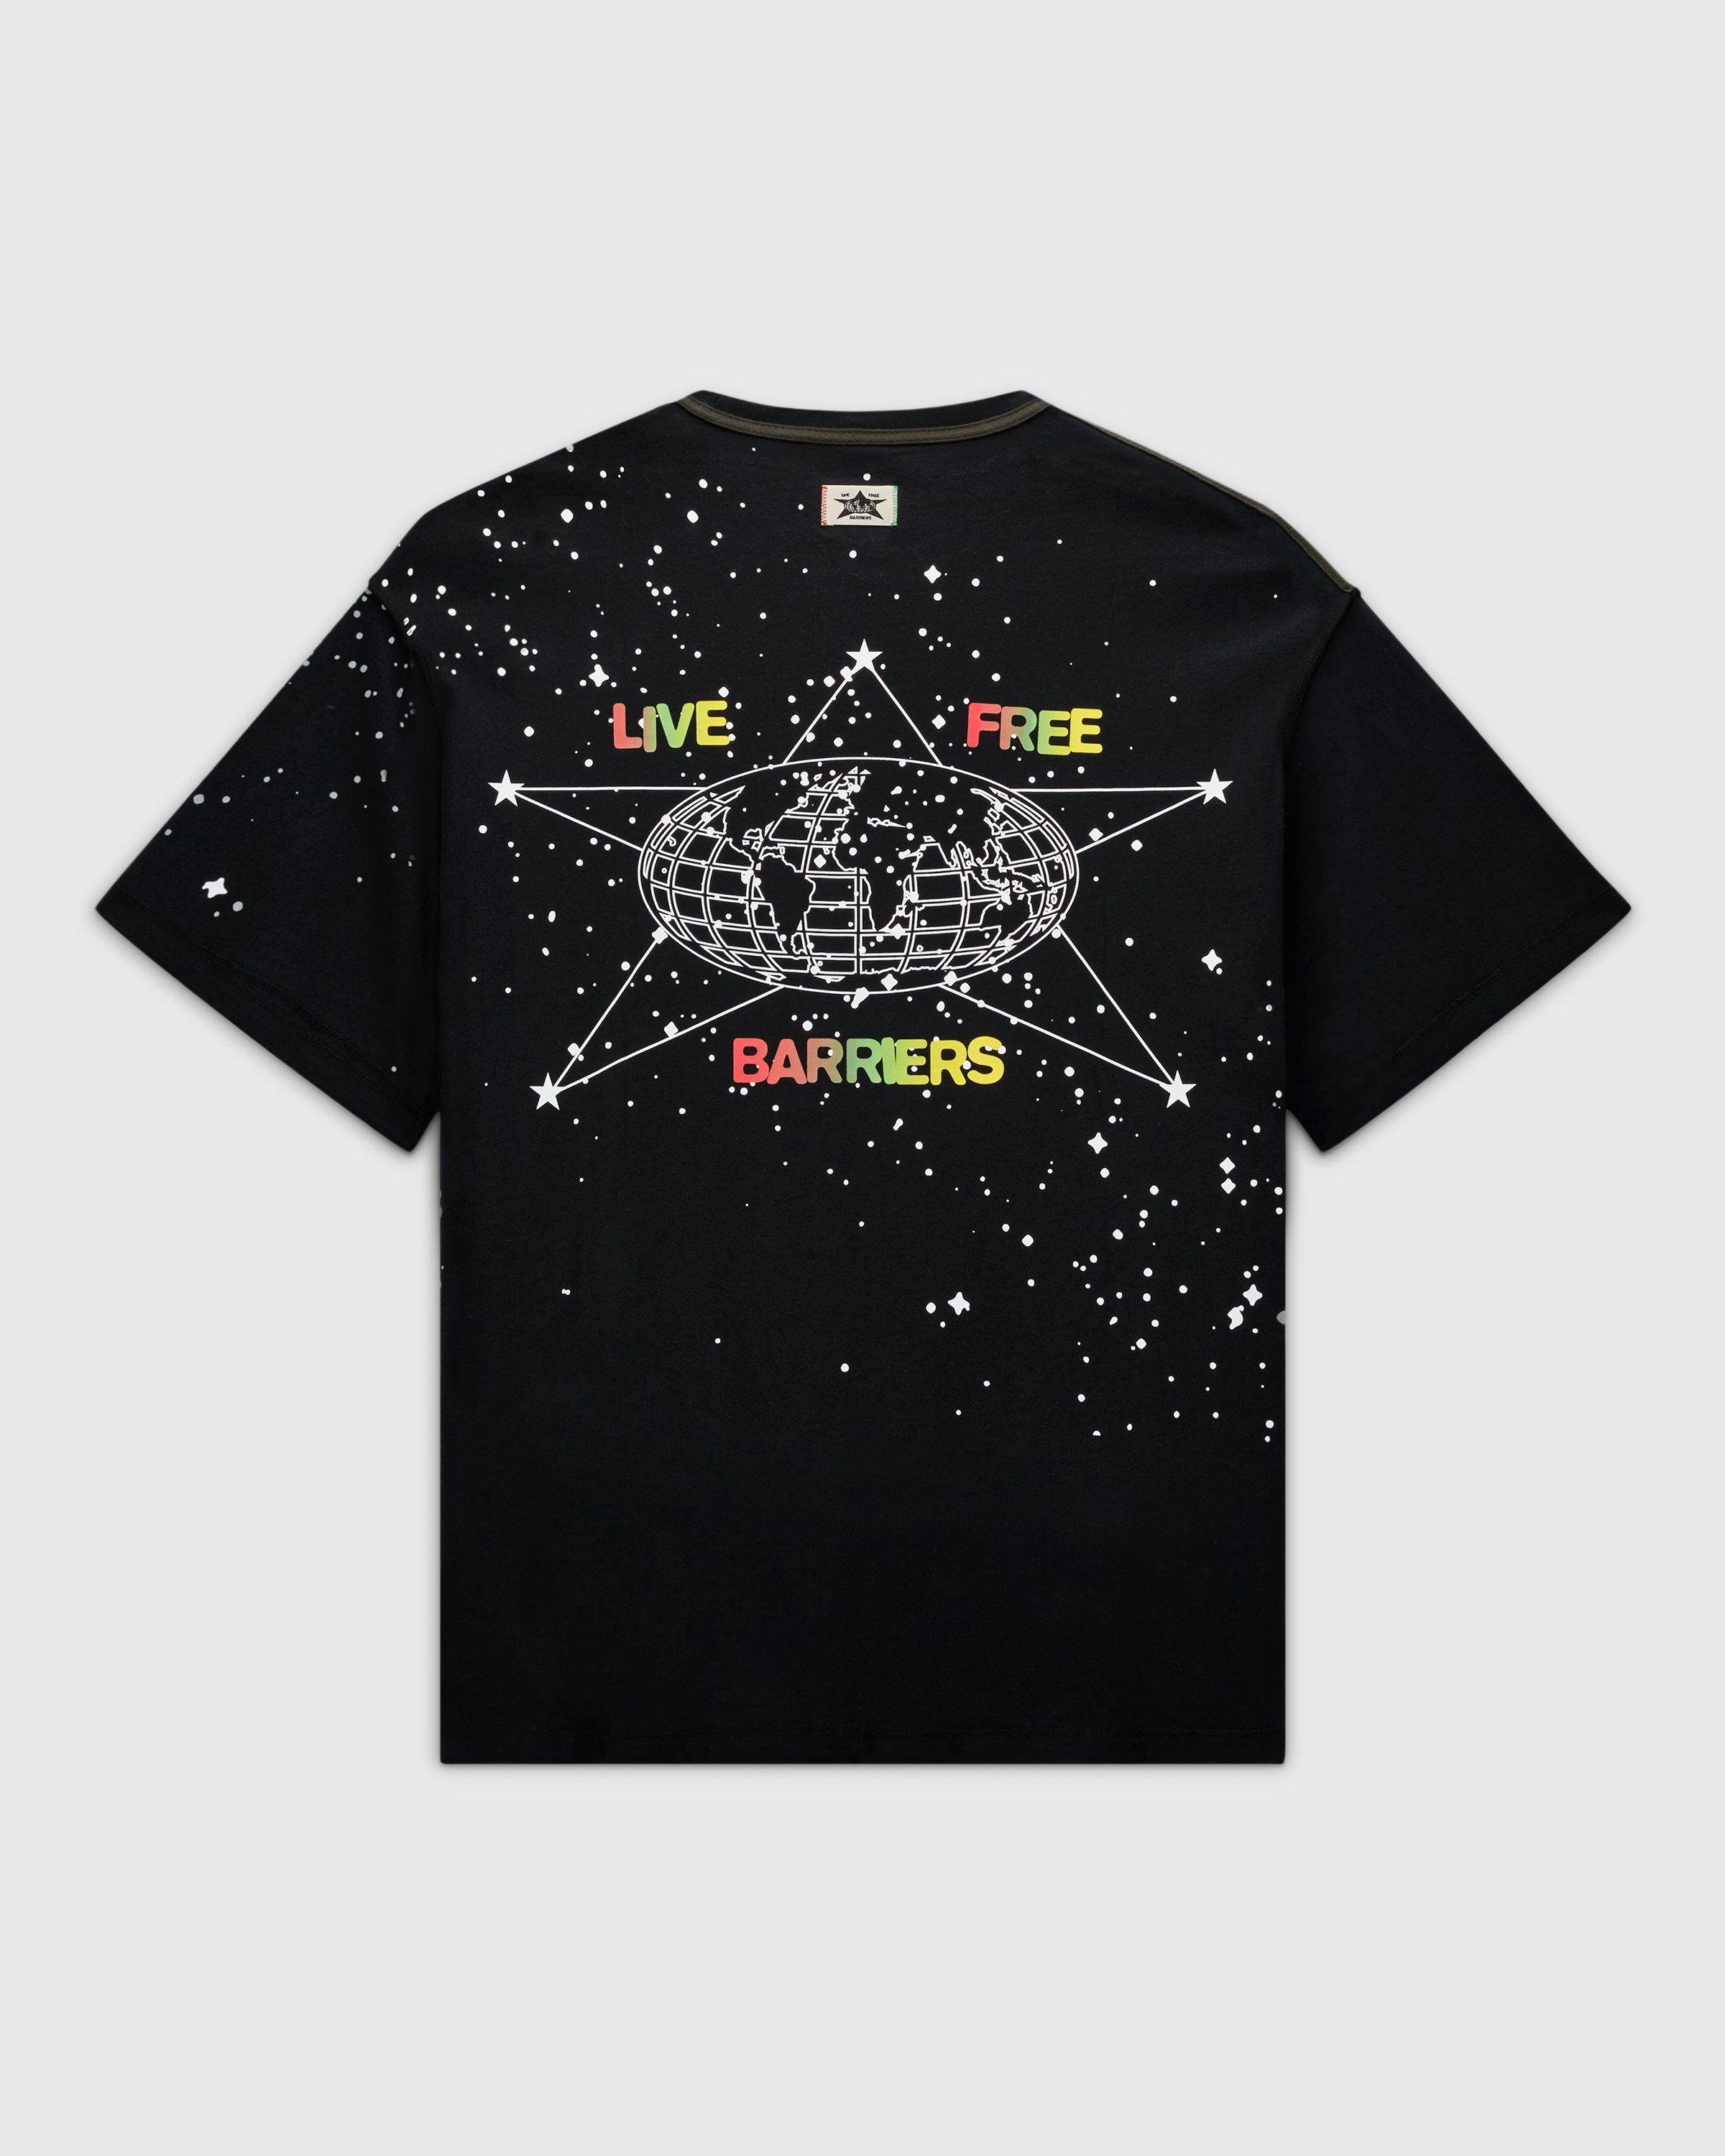 Court Ready Crossover Tee Black by CONVERSE X BARRIERS